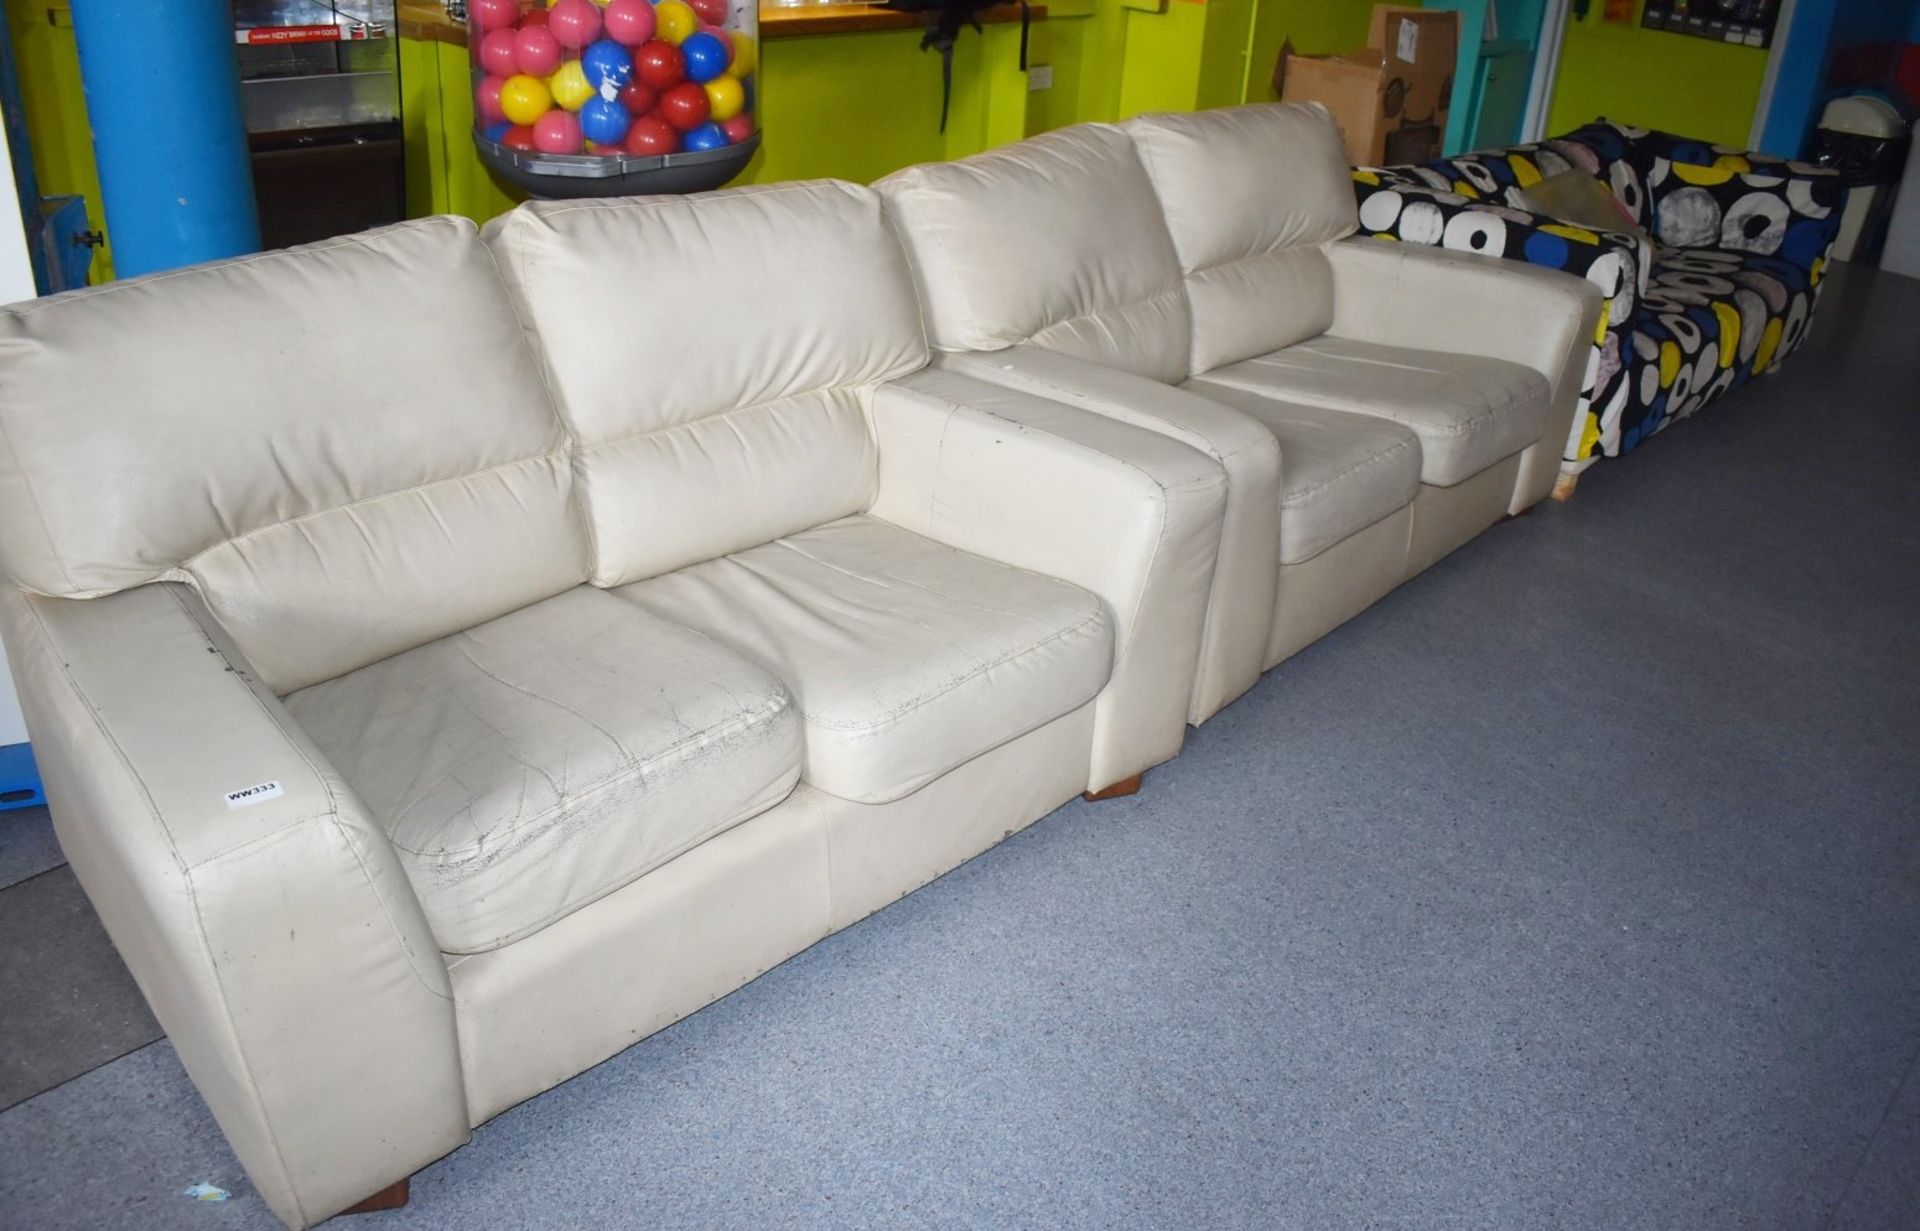 3 x Assorted Sofas - Includes 2 x Cream Leather Sofas and 1 x Fabric Sofa - Ref WW333 - CL520 - - Image 2 of 2